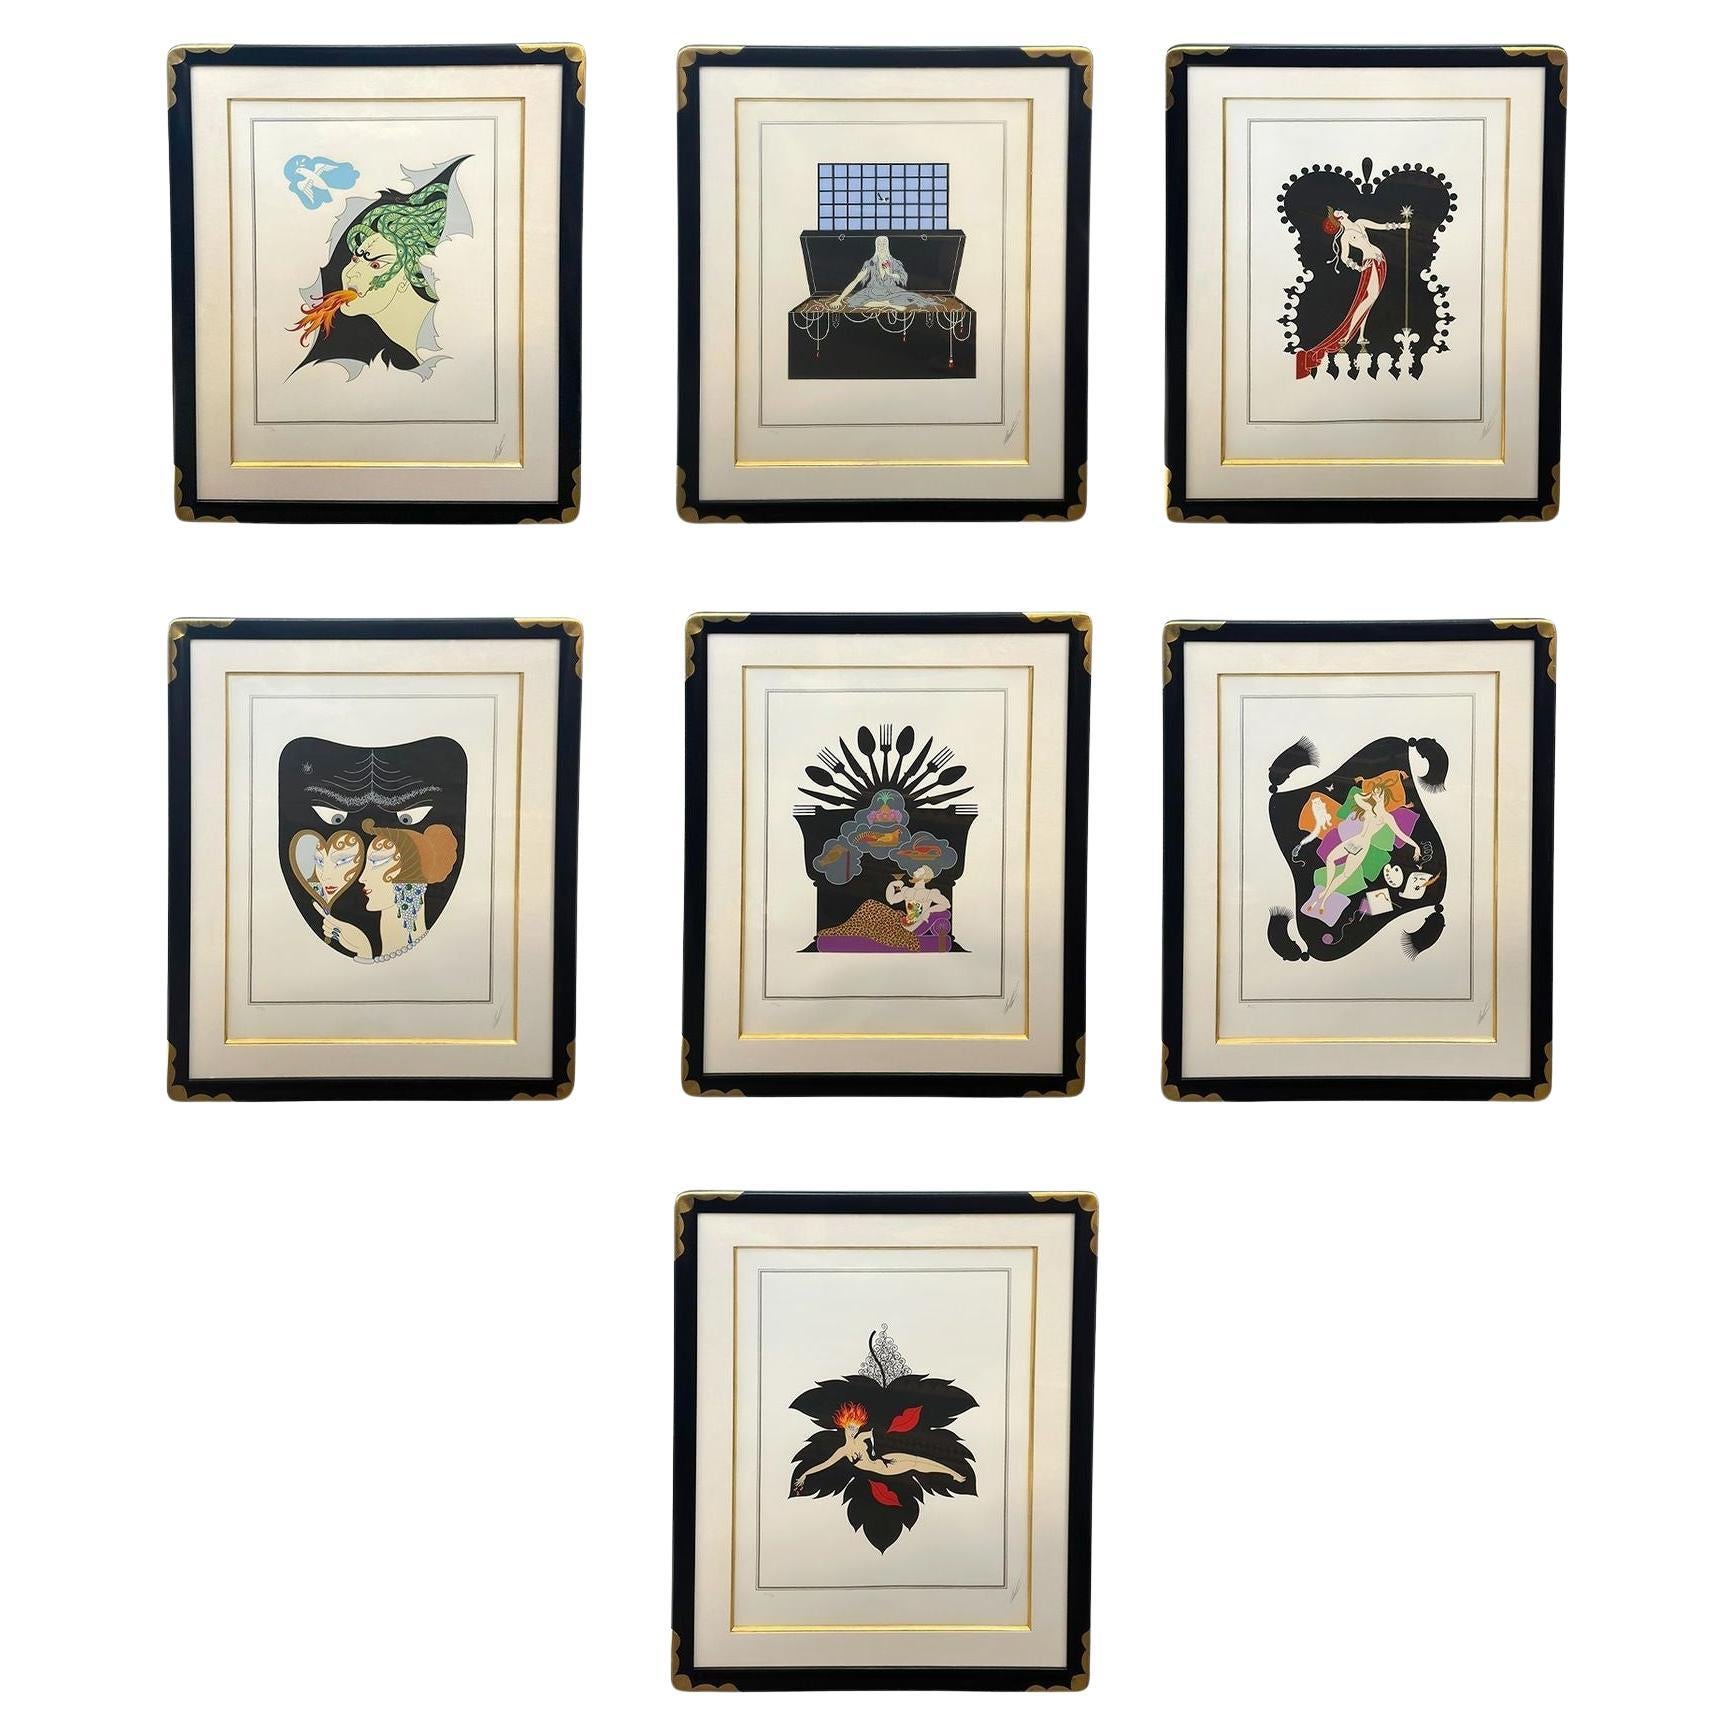 Set of 7 Erté Lithographs of the Seven Deadly Sins, 1982 For Sale